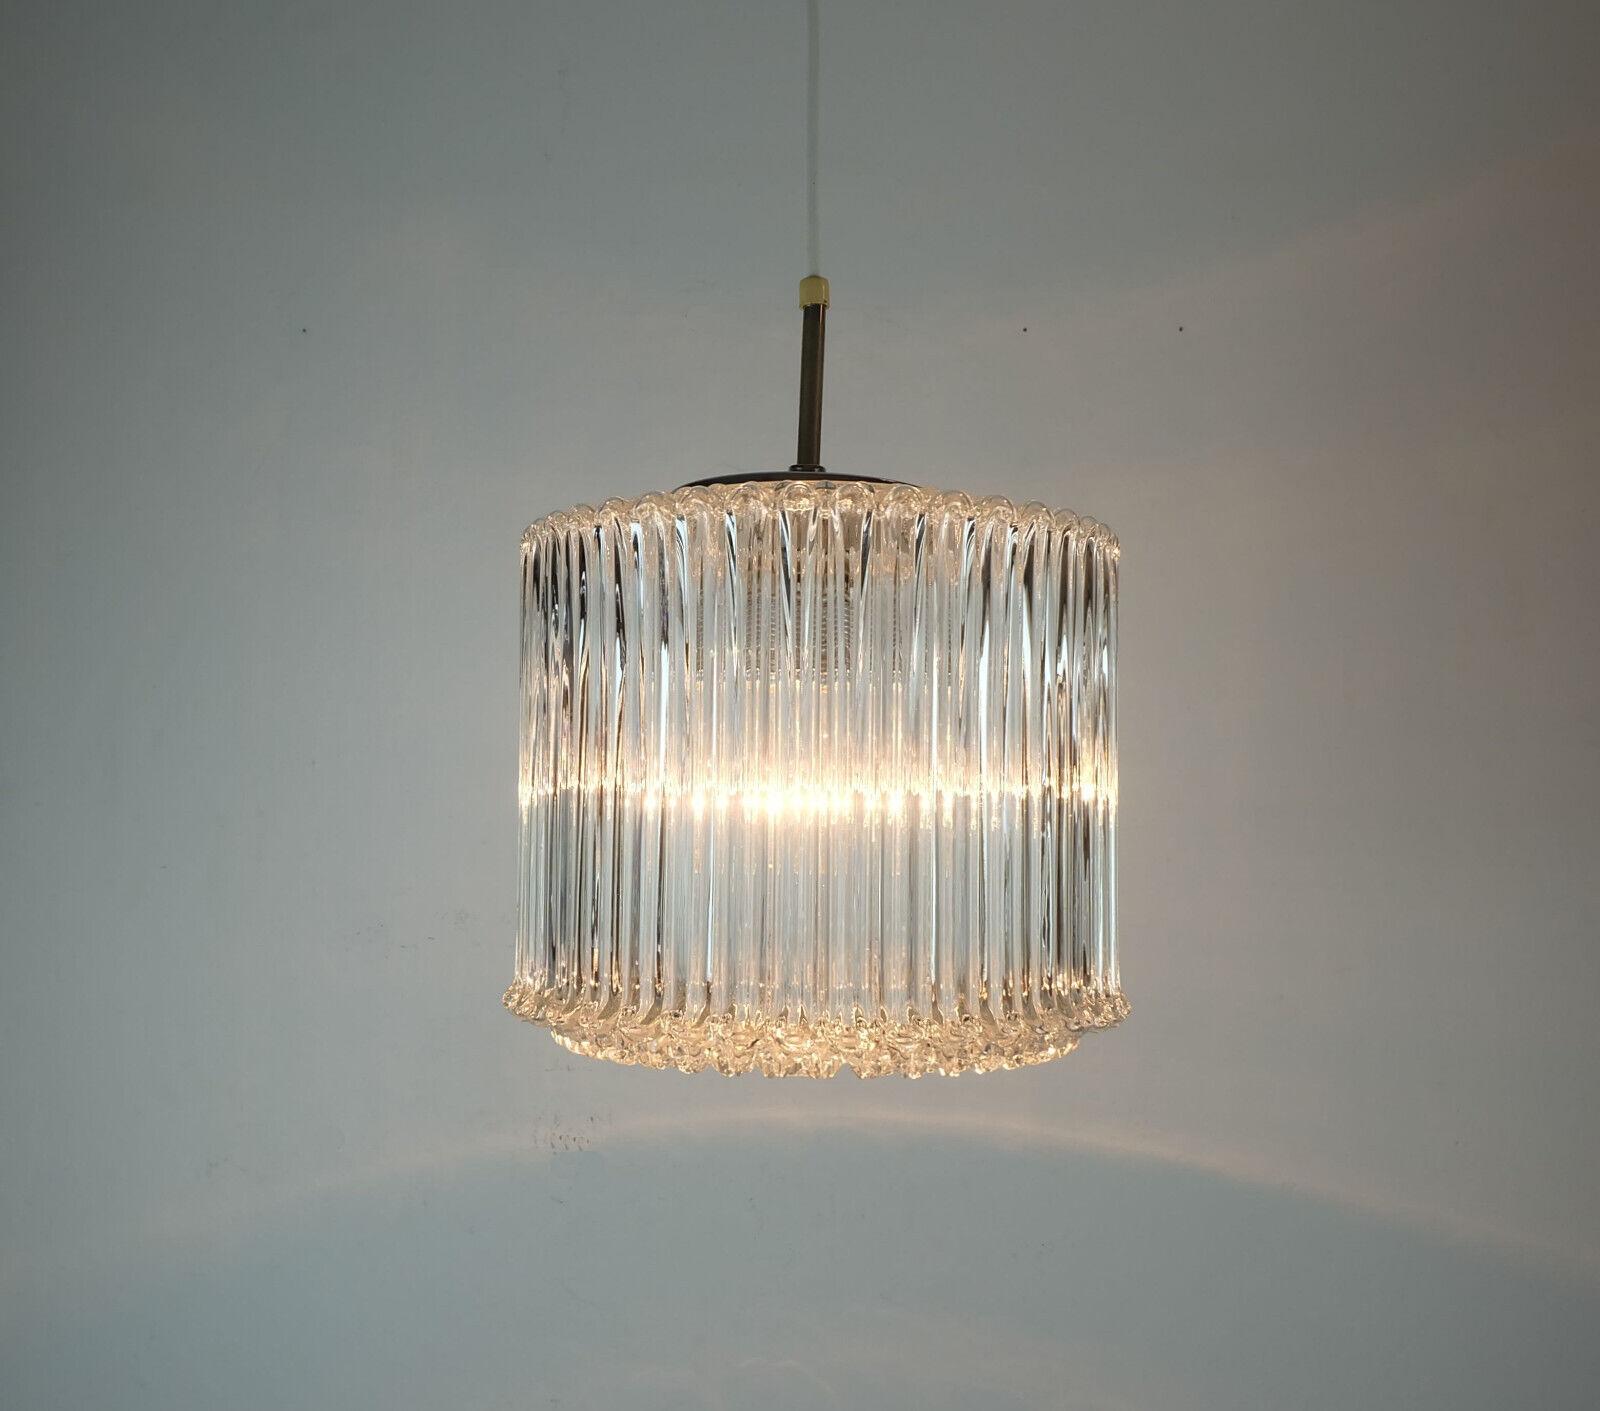 large limburg mid century bubble glass PENDANT LIGHT model P 911 a 1209 clear gl In Good Condition For Sale In Mannheim, DE